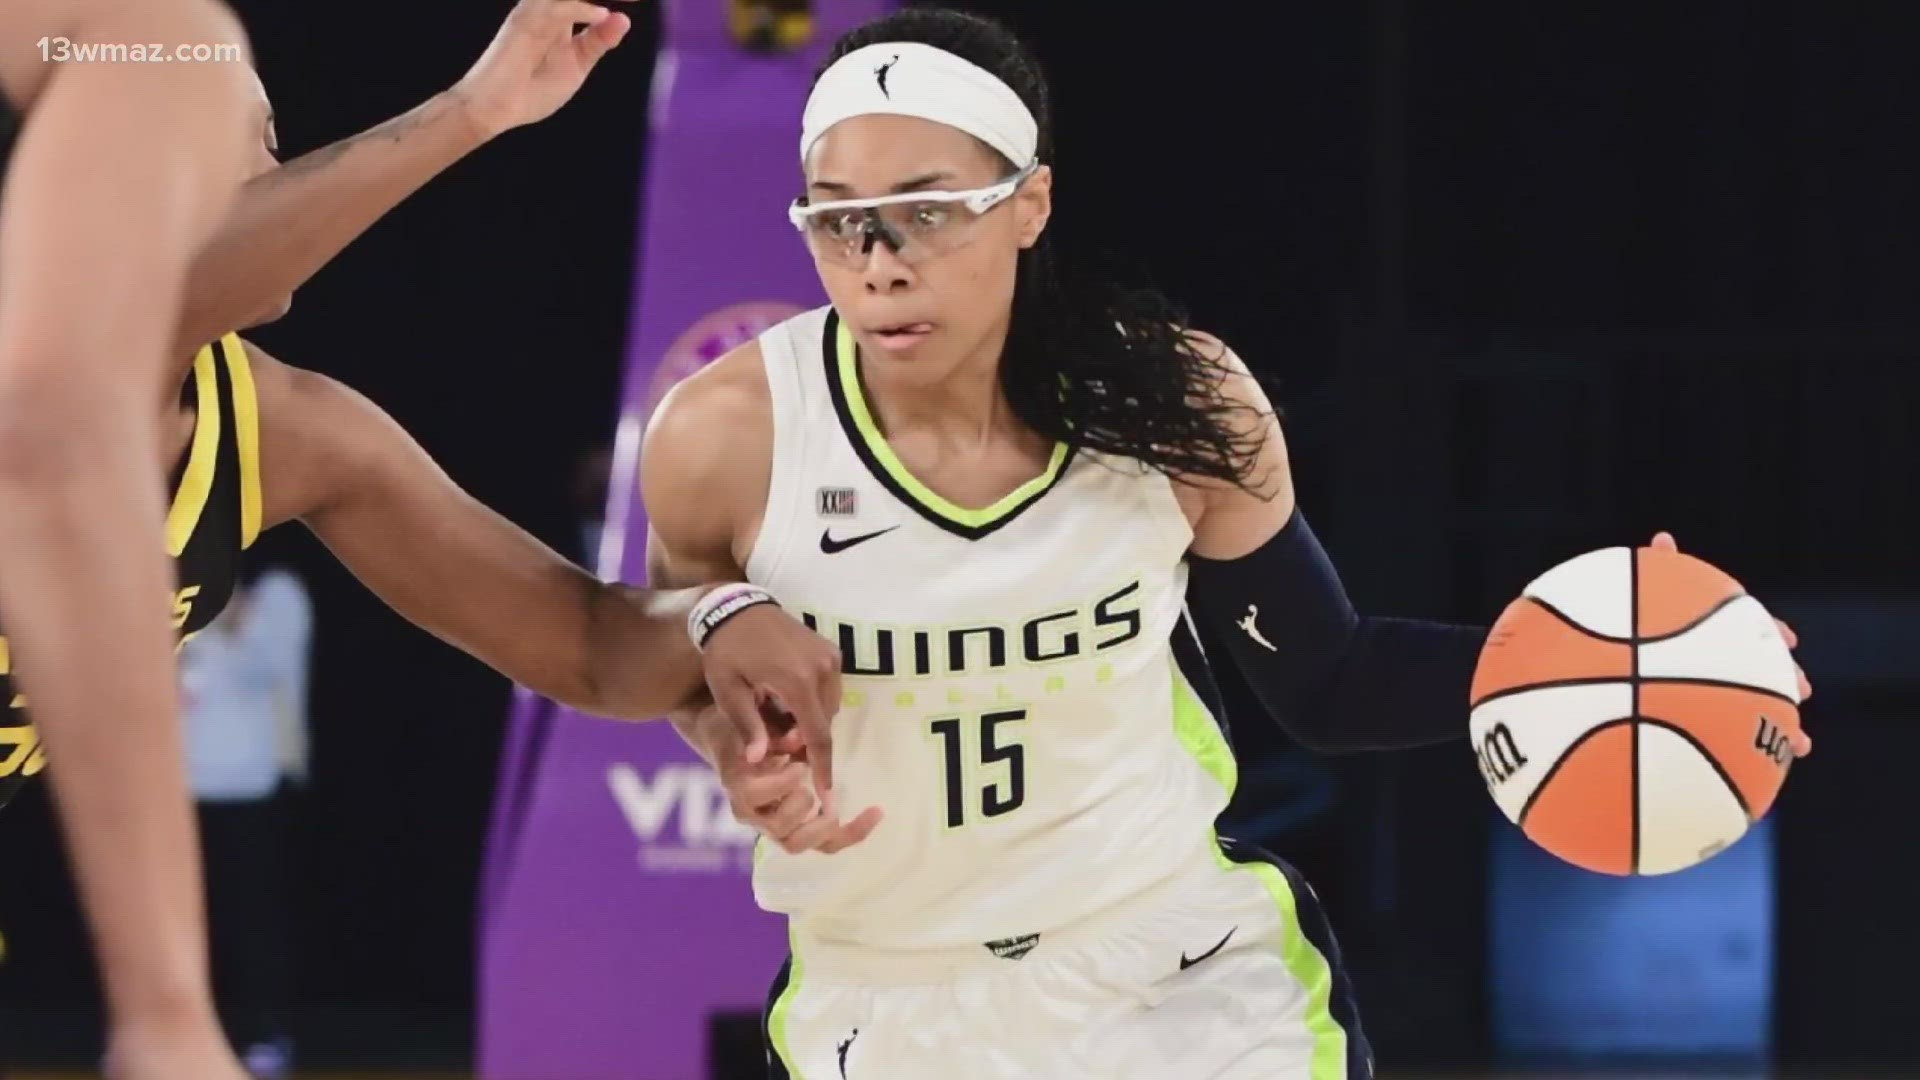 Her first home game in the regular season however will be Sunday, May 28 when the Dream open up with the Indiana Fever.